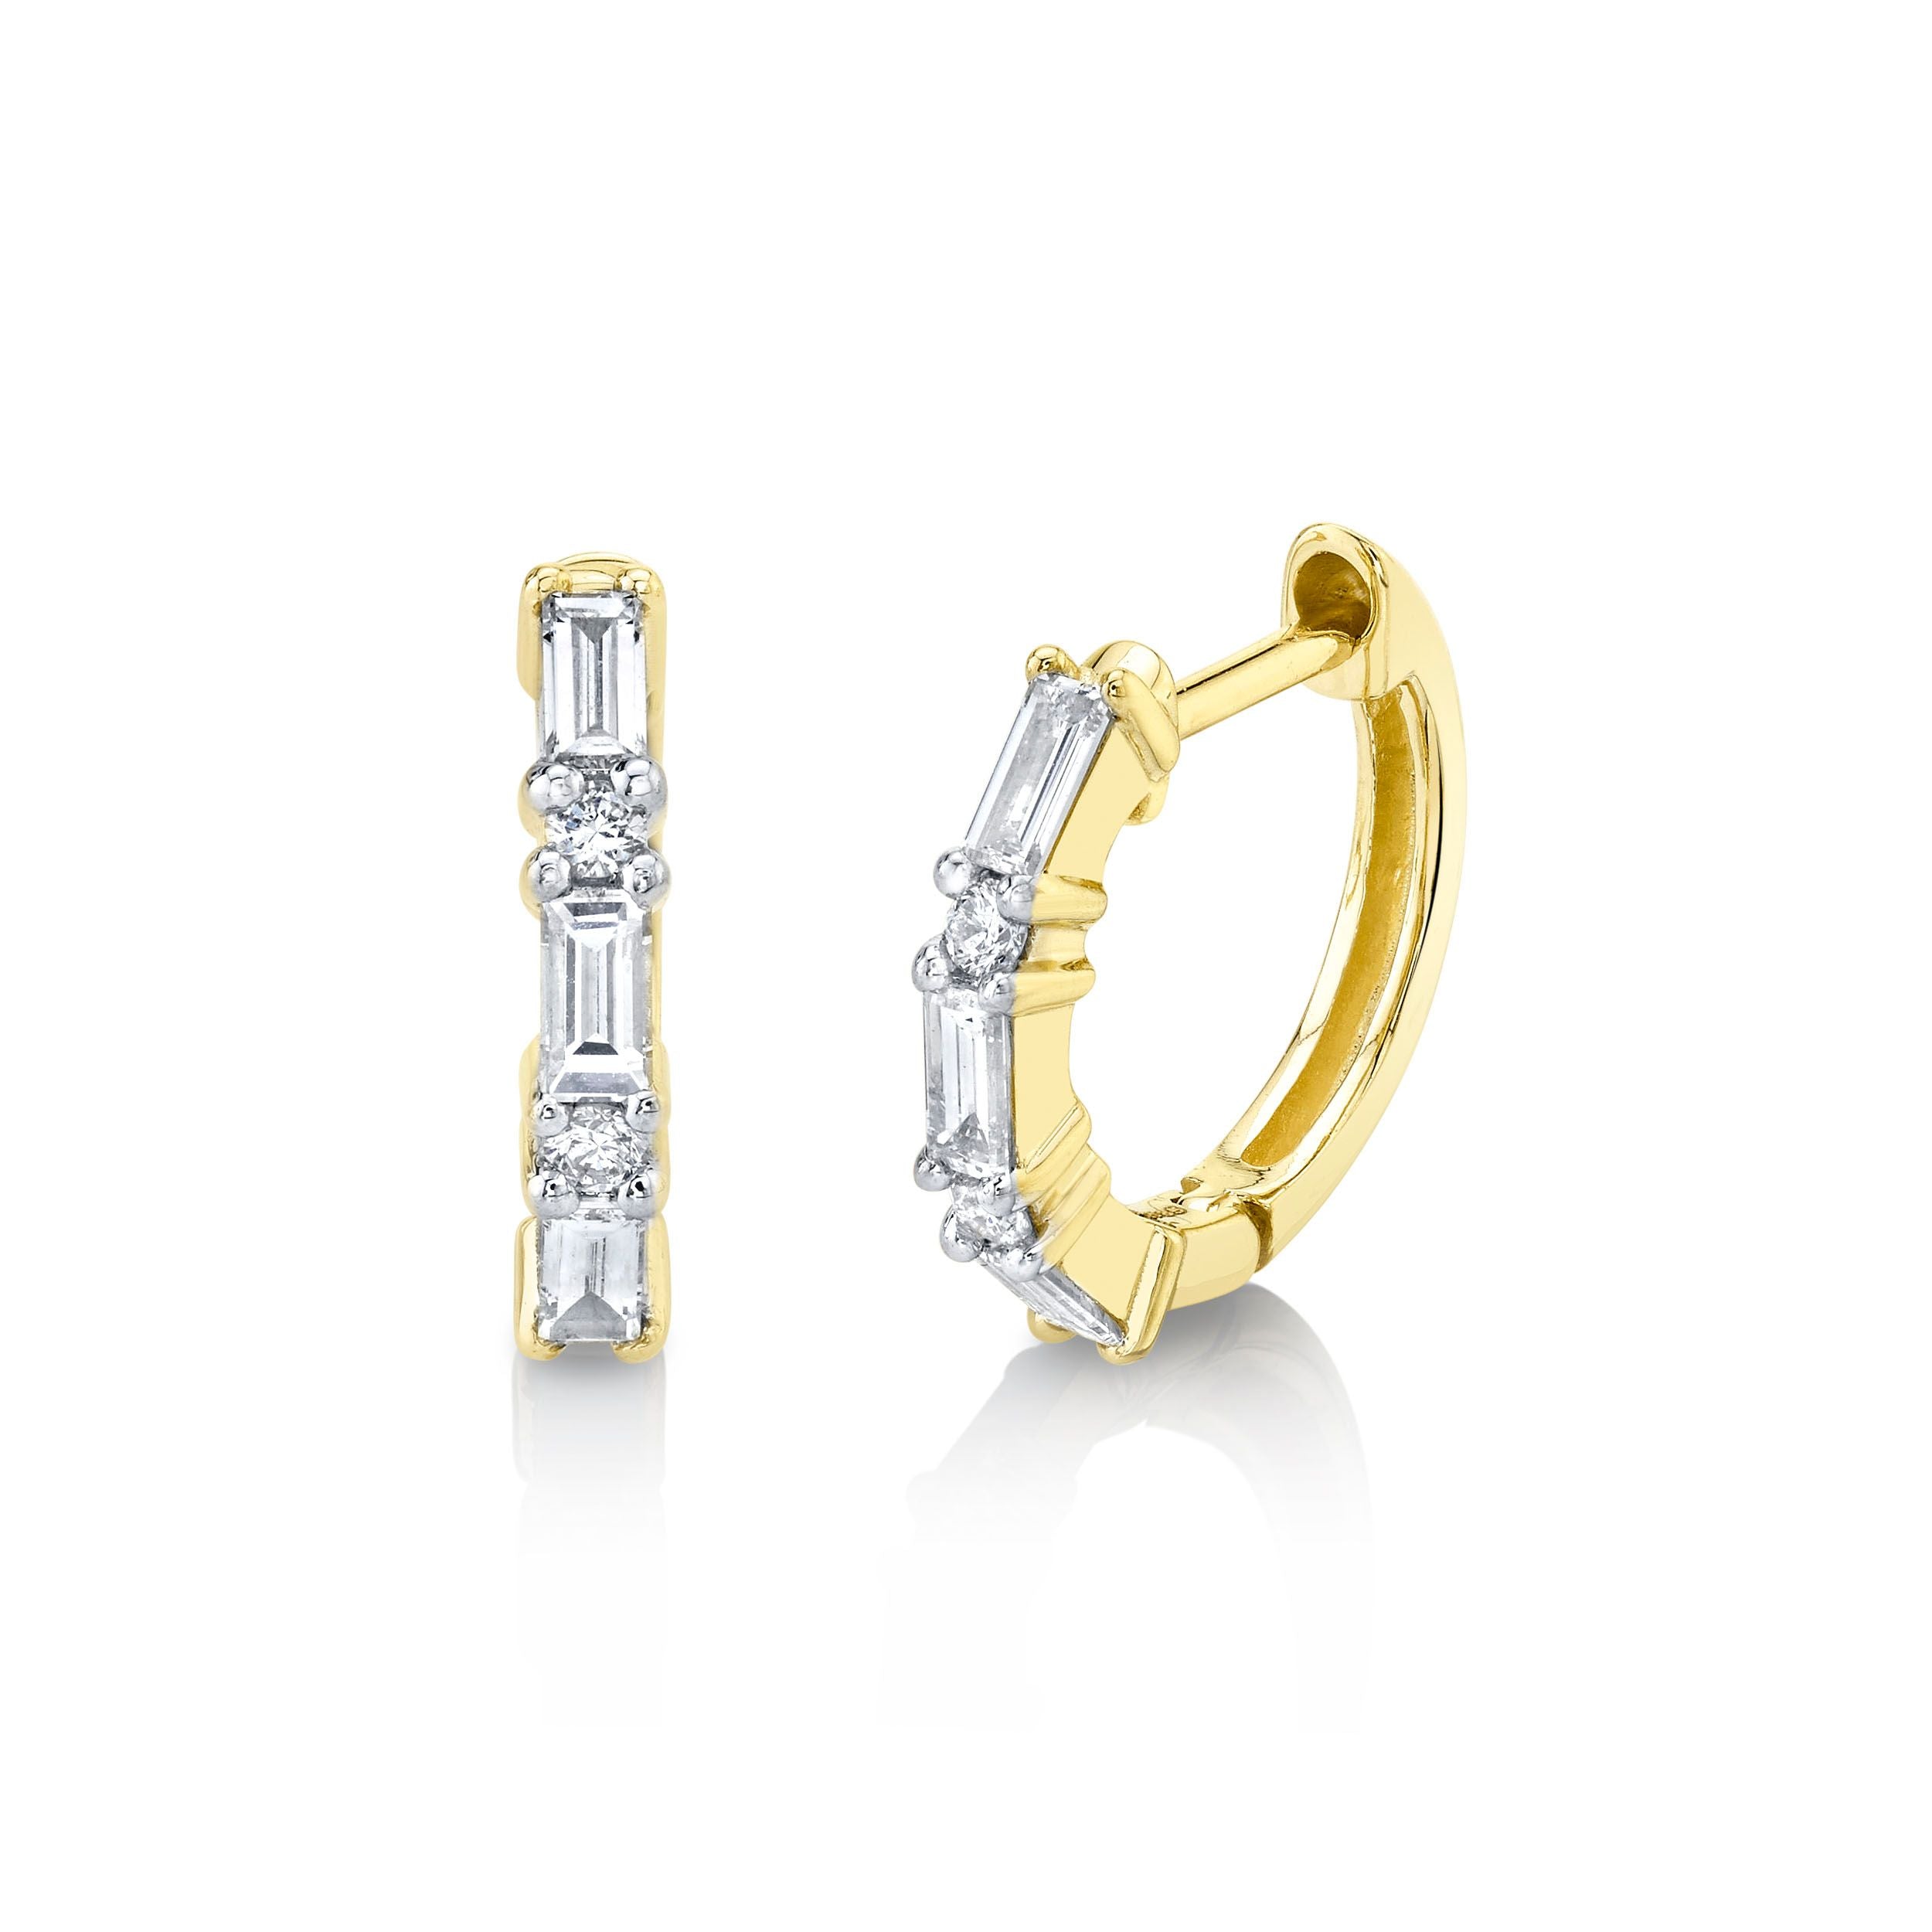 12mm Huggies with Alternating Baguette and Round Diamonds